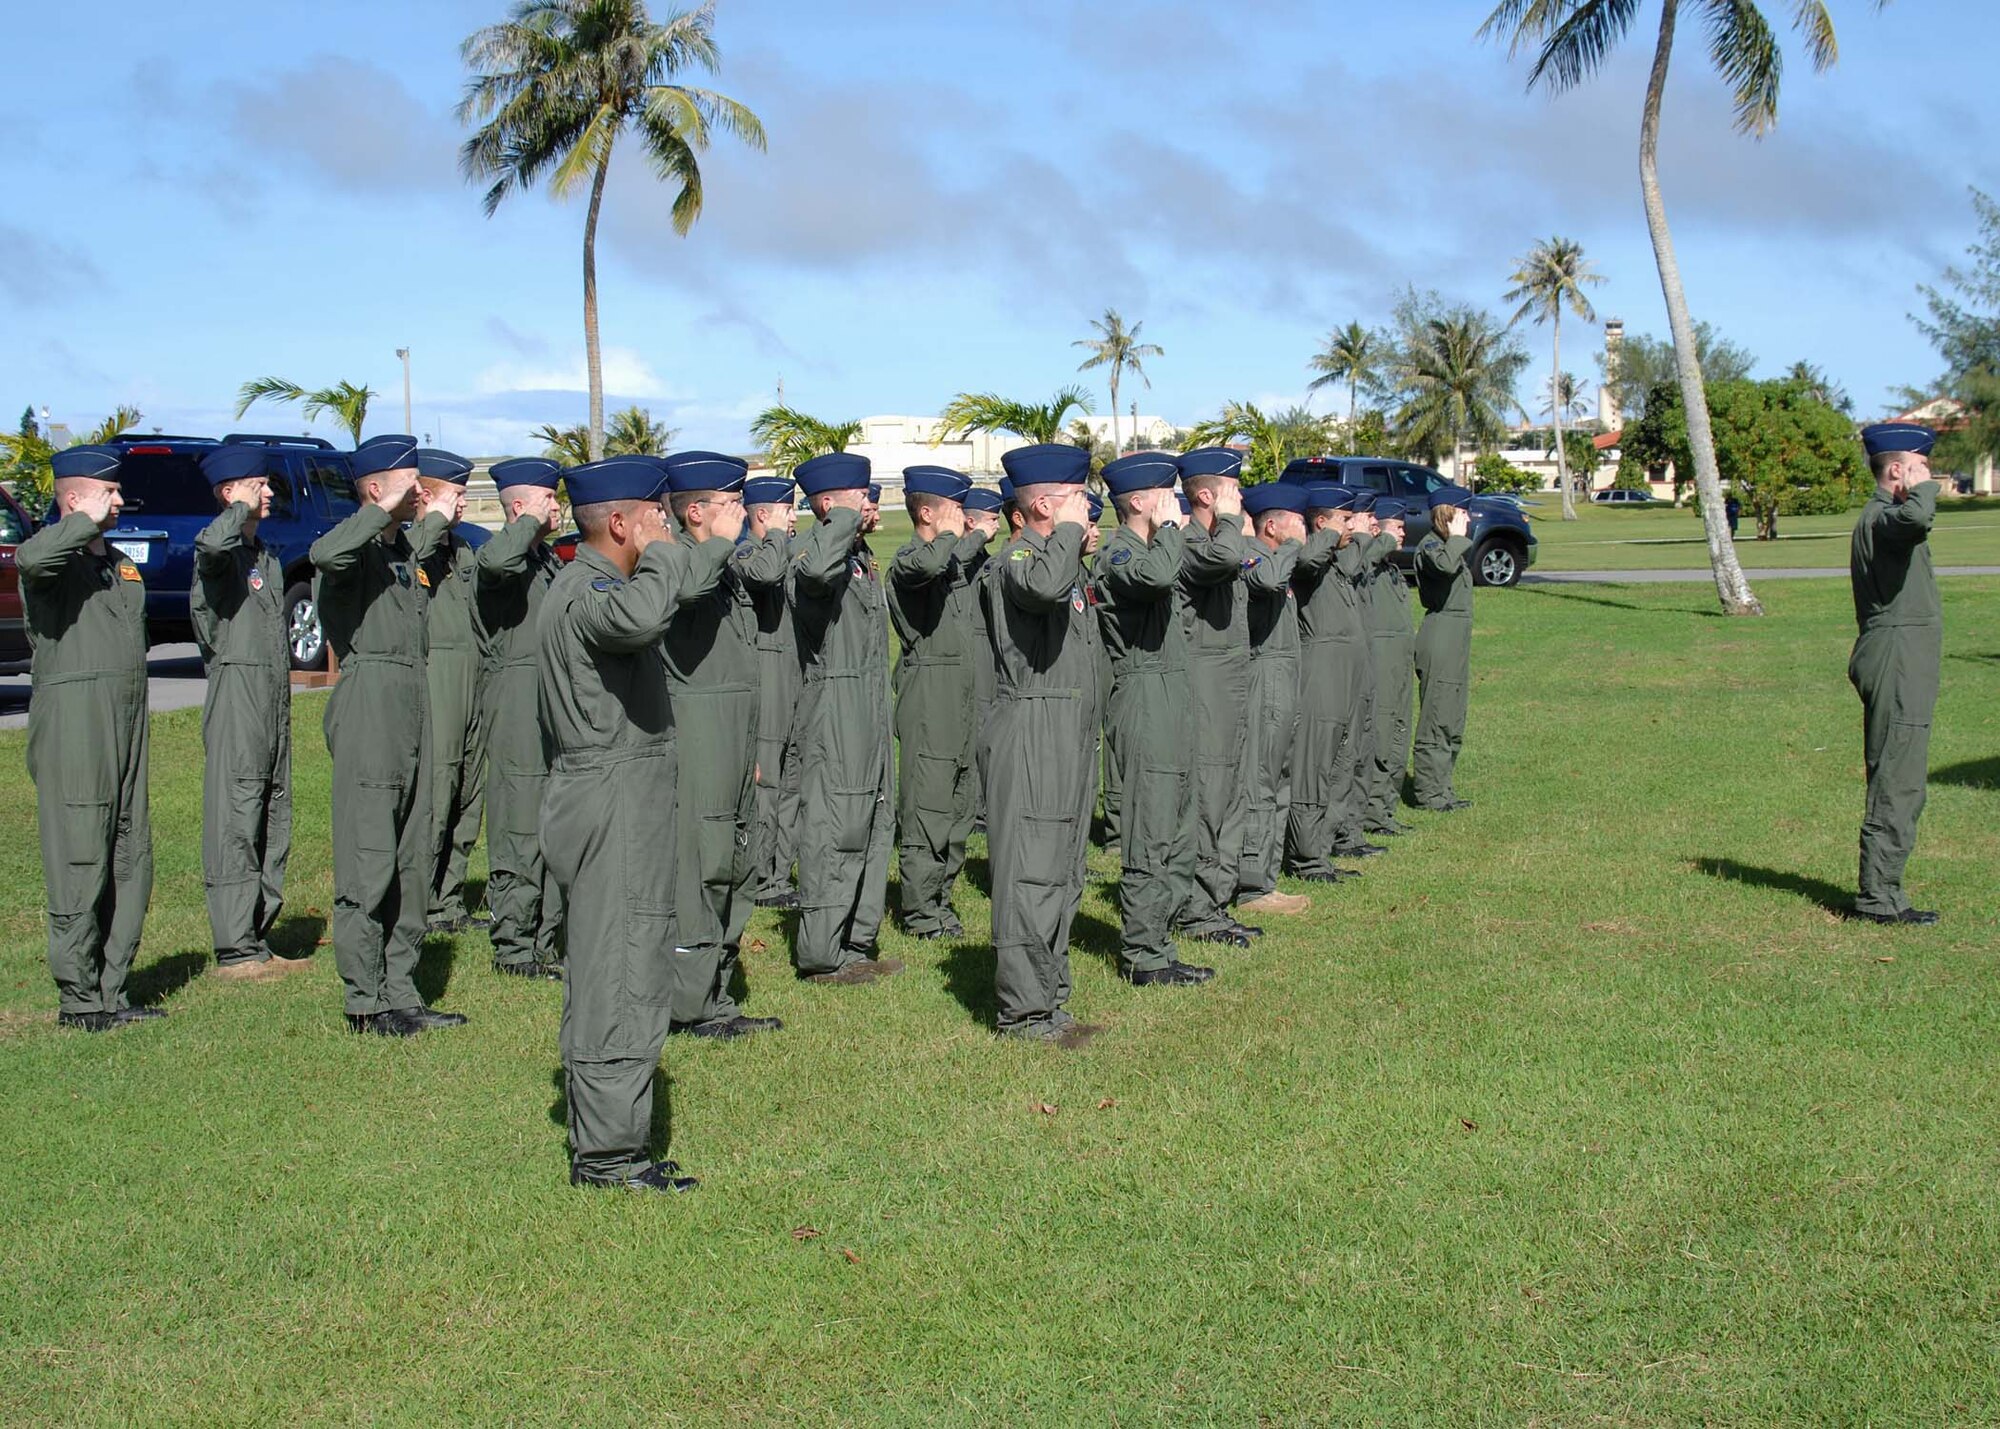 ANDERSEN AIR FORCE BASE, Guam -- Aircrew members from the 36th Expeditionary Bomb Squadron render a salute during the National Anthem at the Operation Linebacker II Ceremony at Arc Light Memorial Park here Dec. 18. During the ceremony, 33 Airmen stood in formation, each representing an Airman who died during Operation Linebacker II. (U.S. Air Force photo by Senior Airman Sonya Croston)